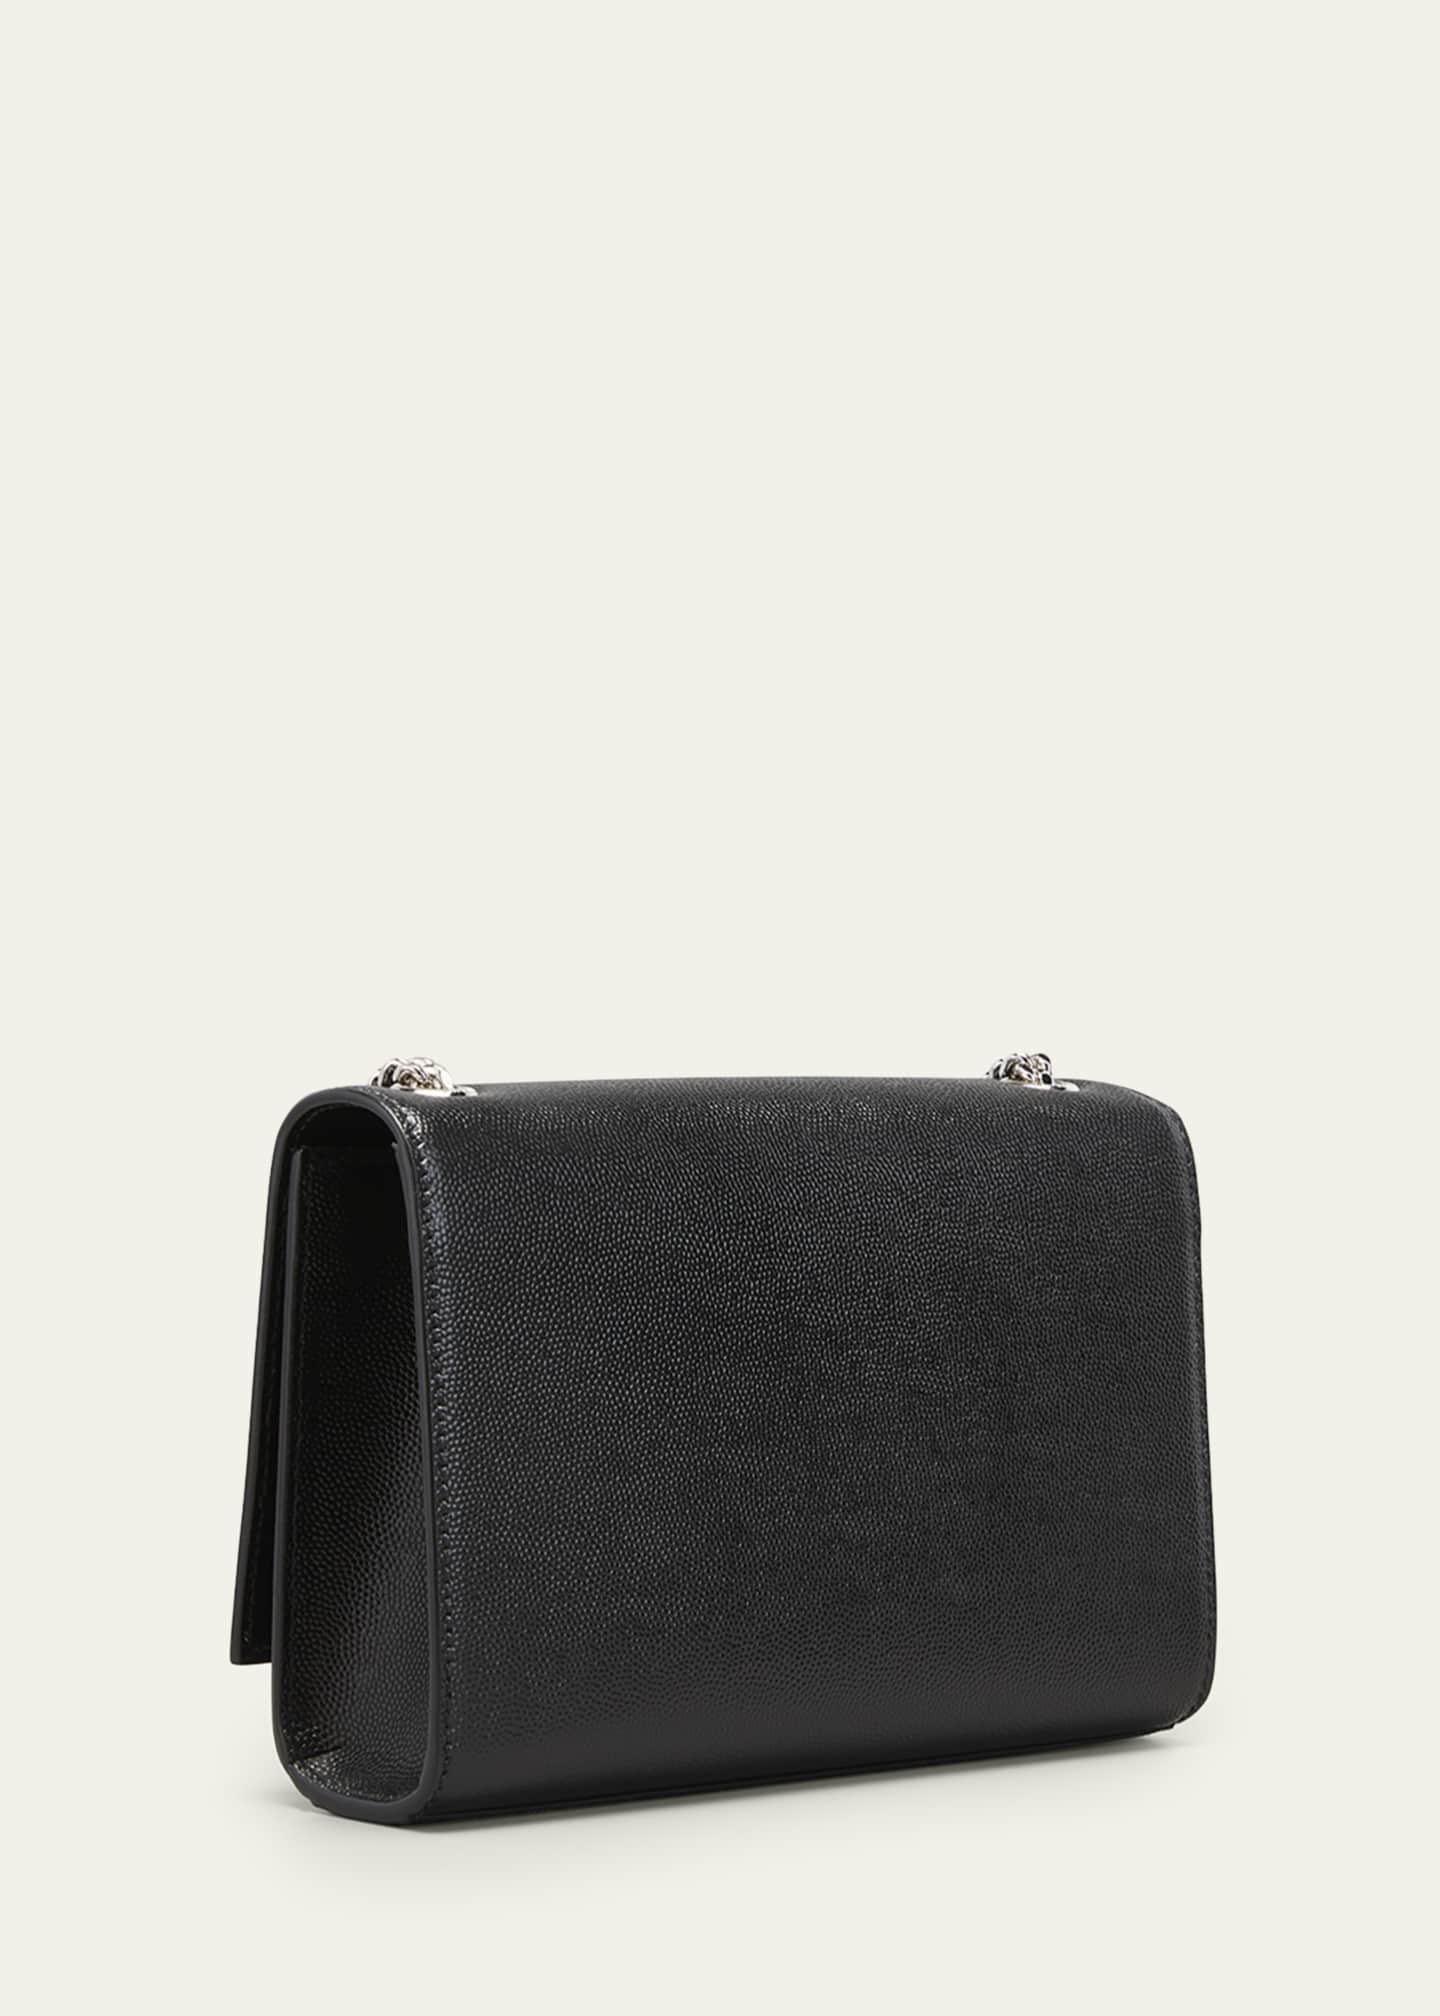 Saint Laurent Kate Small YSL Crossbody Bag in Grained Leather ...